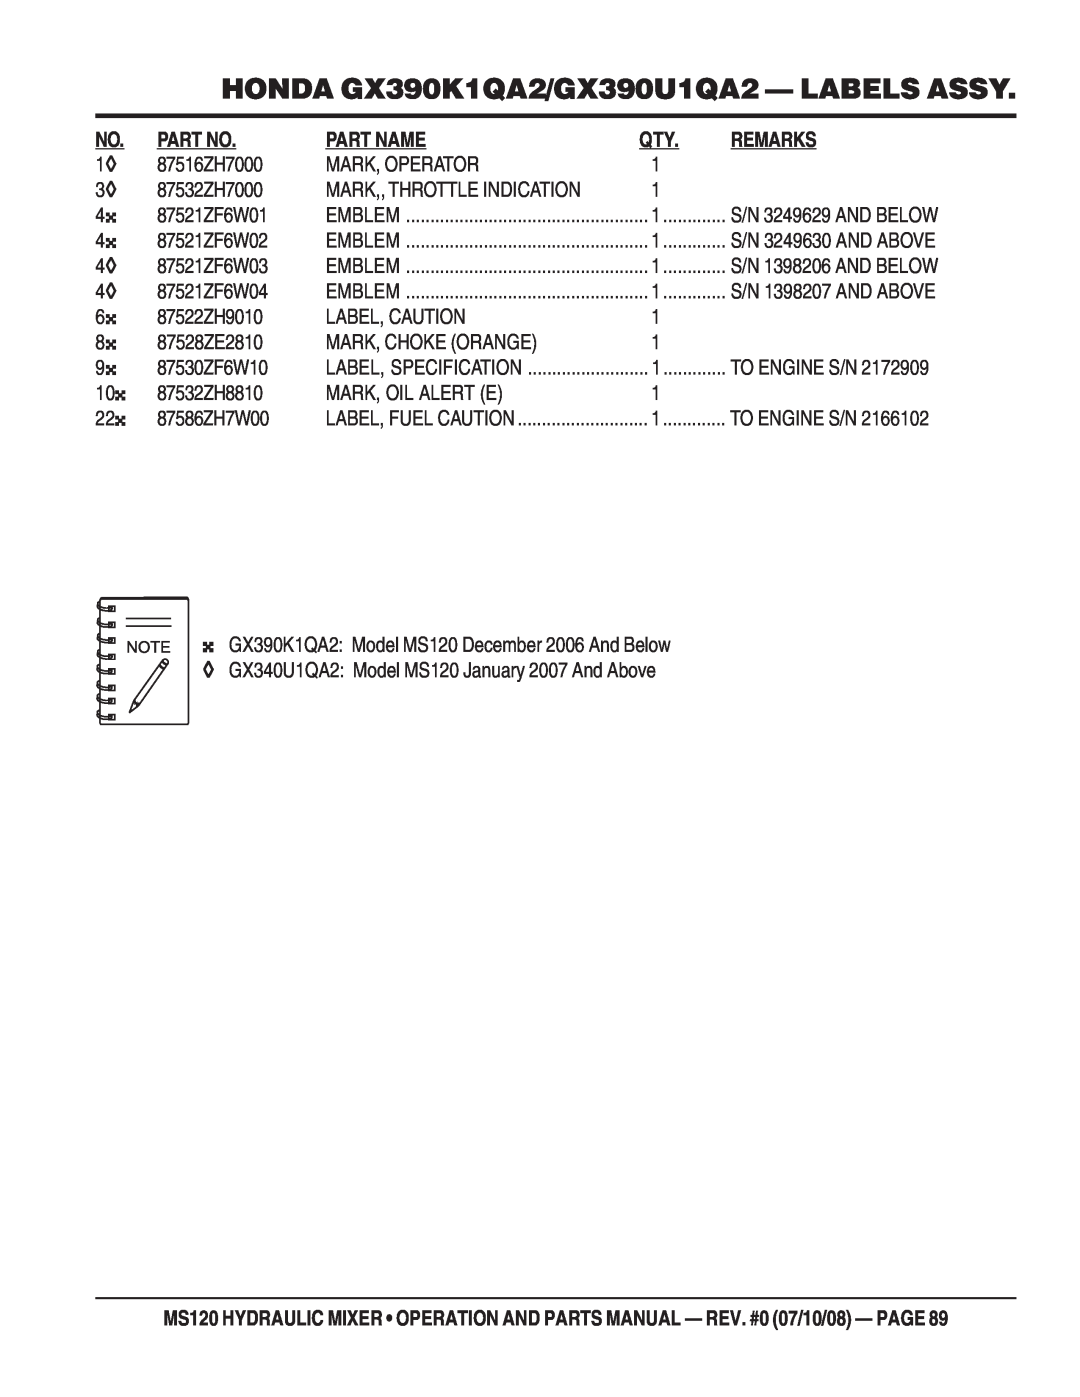 Stow MS120HD13, MS120H13 manual HONDA GX390K1QA2/GX390U1QA2 - LABELS ASSY, Part Name, Remarks 